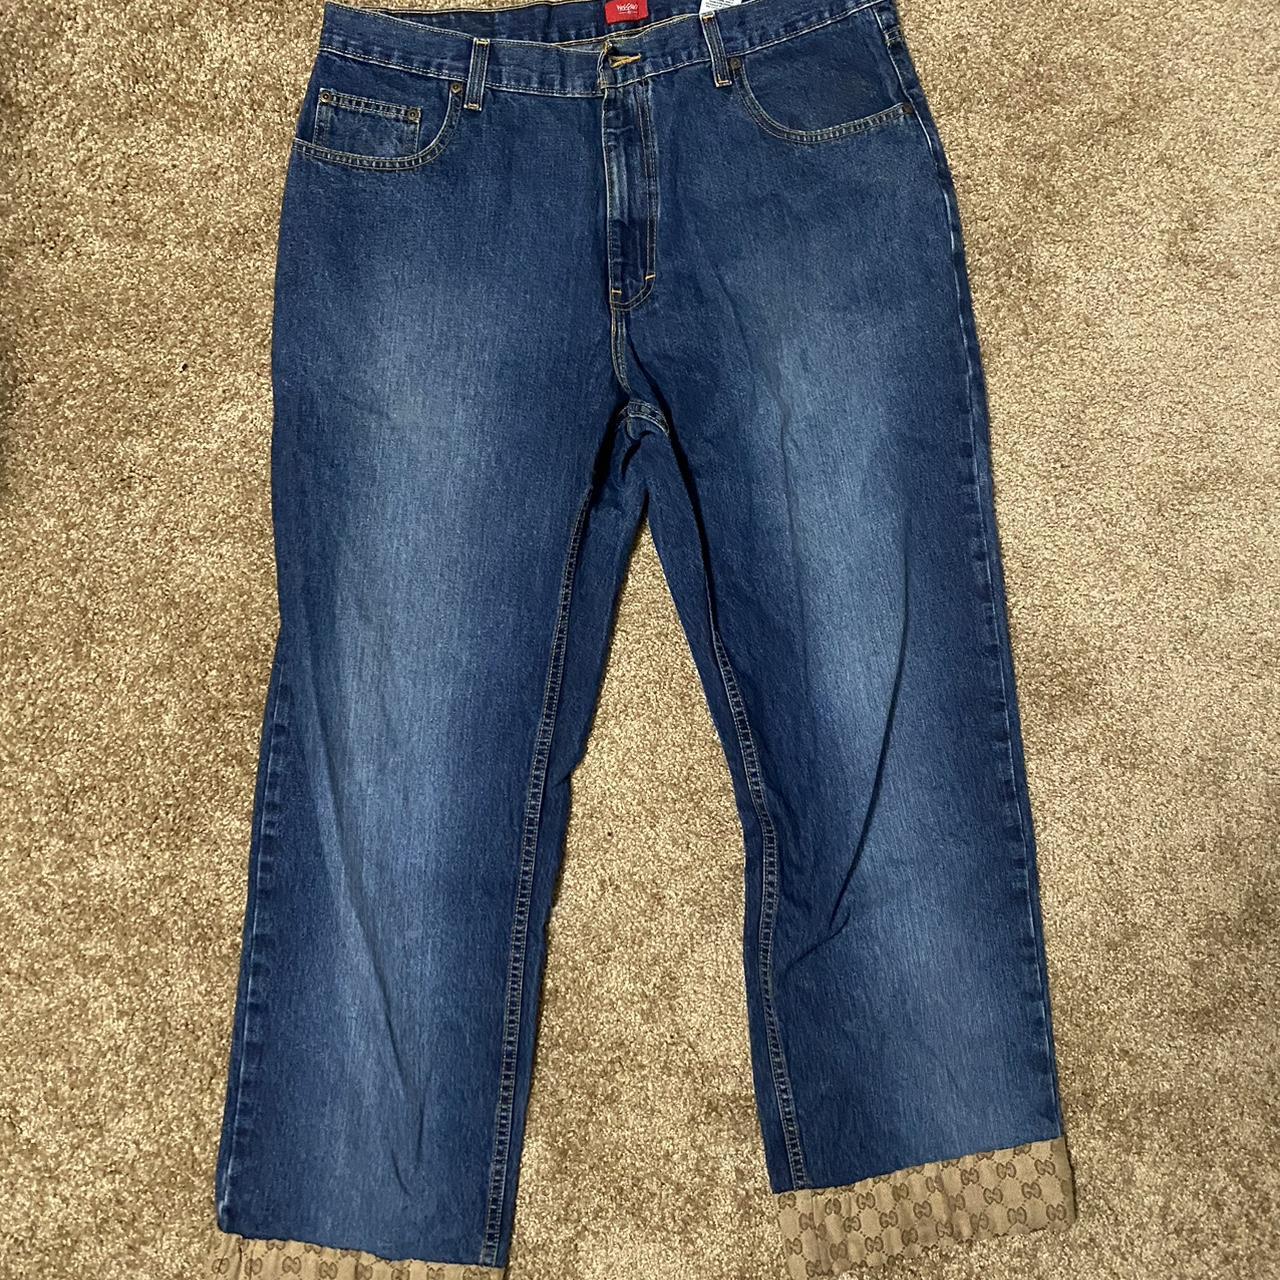 Mossimo Men's Blue and Gold Jeans (2)